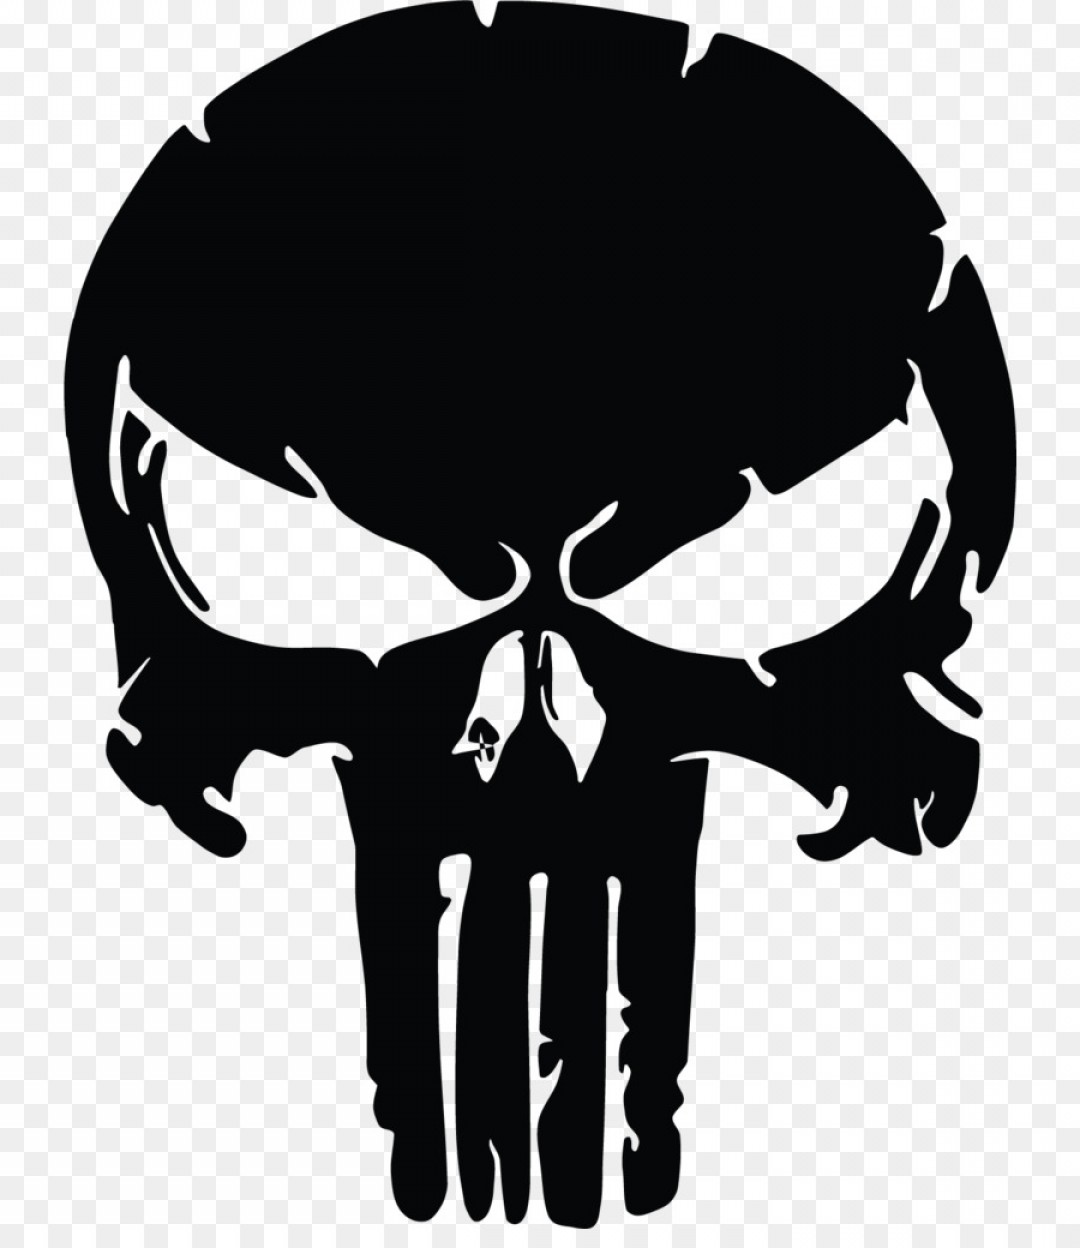 Punisher Skull Vector Image at Vectorified.com | Collection of Punisher ...